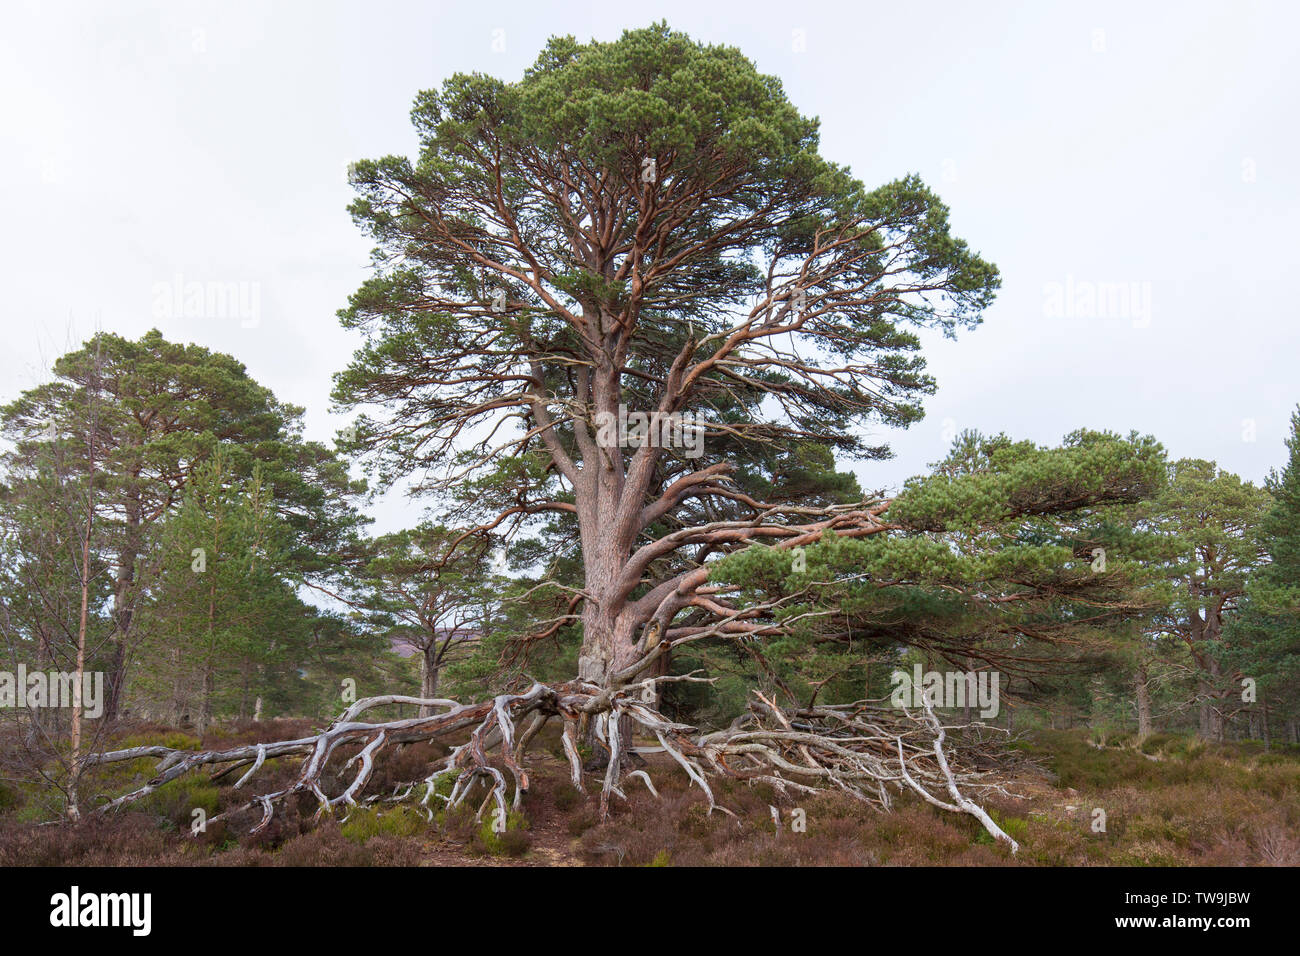 Old Scots Pine (Pinus sylvestris) showing its roots Cairngorms National Park, Scotland, Great Britain Stock Photo